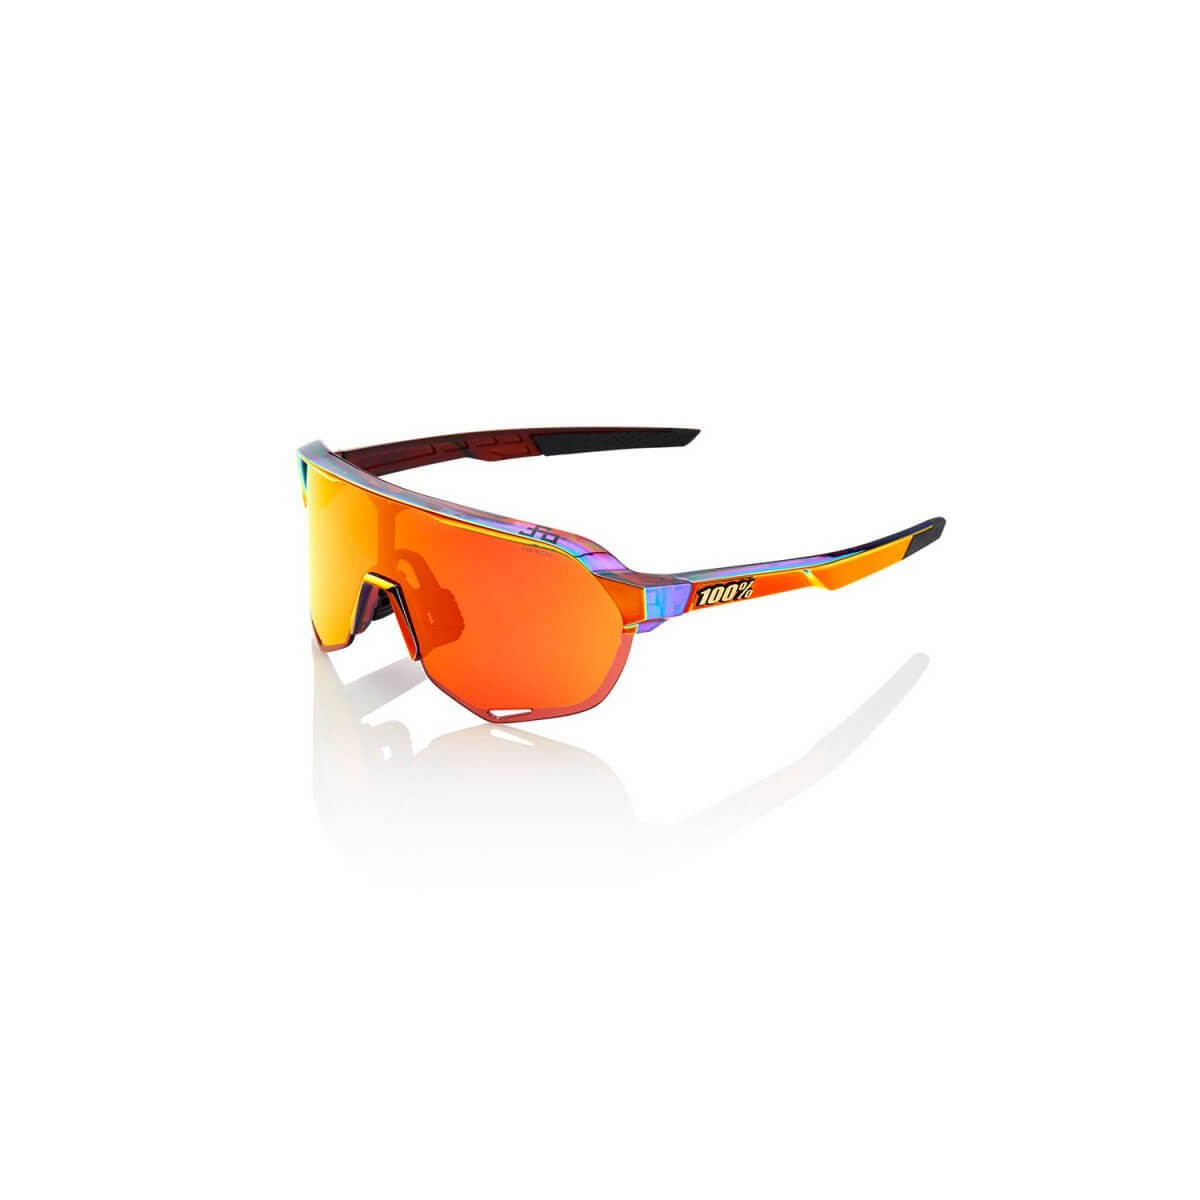 Brille 100% S2 PETER SAGAN LIMITED EDITION (HD MULTILAYER RED MIRROR LENS)